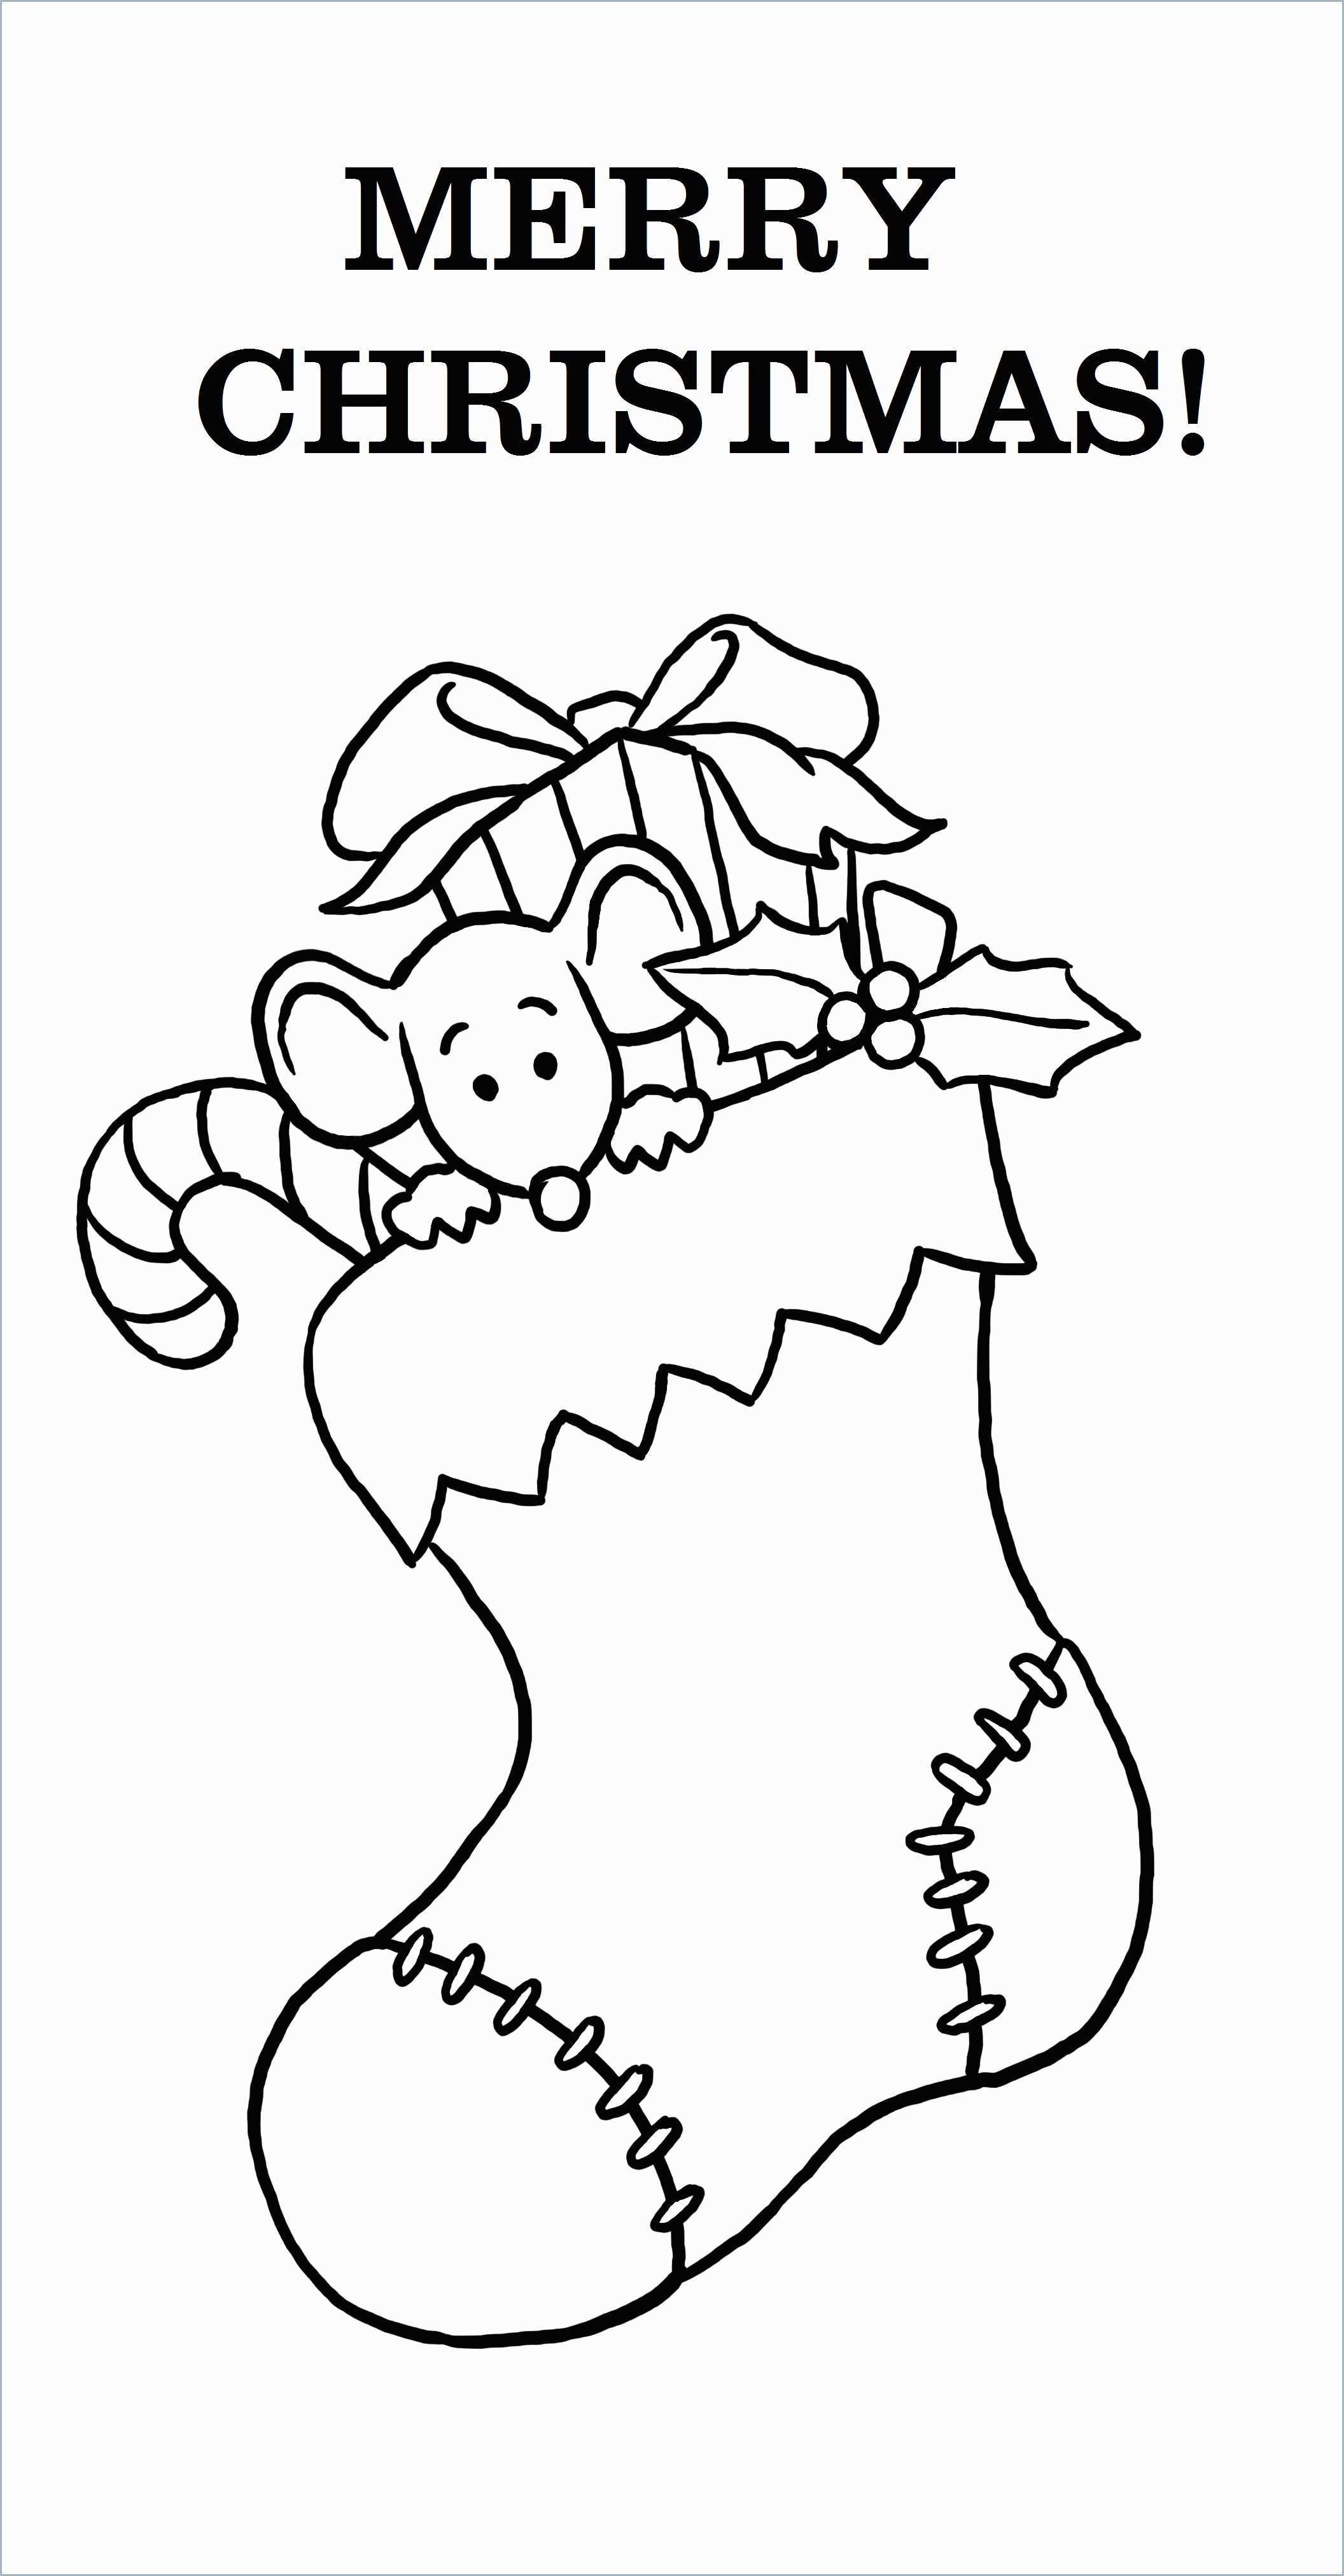 Coloring Ideas : Christmas Card Coloring Pages Merry Page Fresh Free - Free Printable Christmas Cards To Color